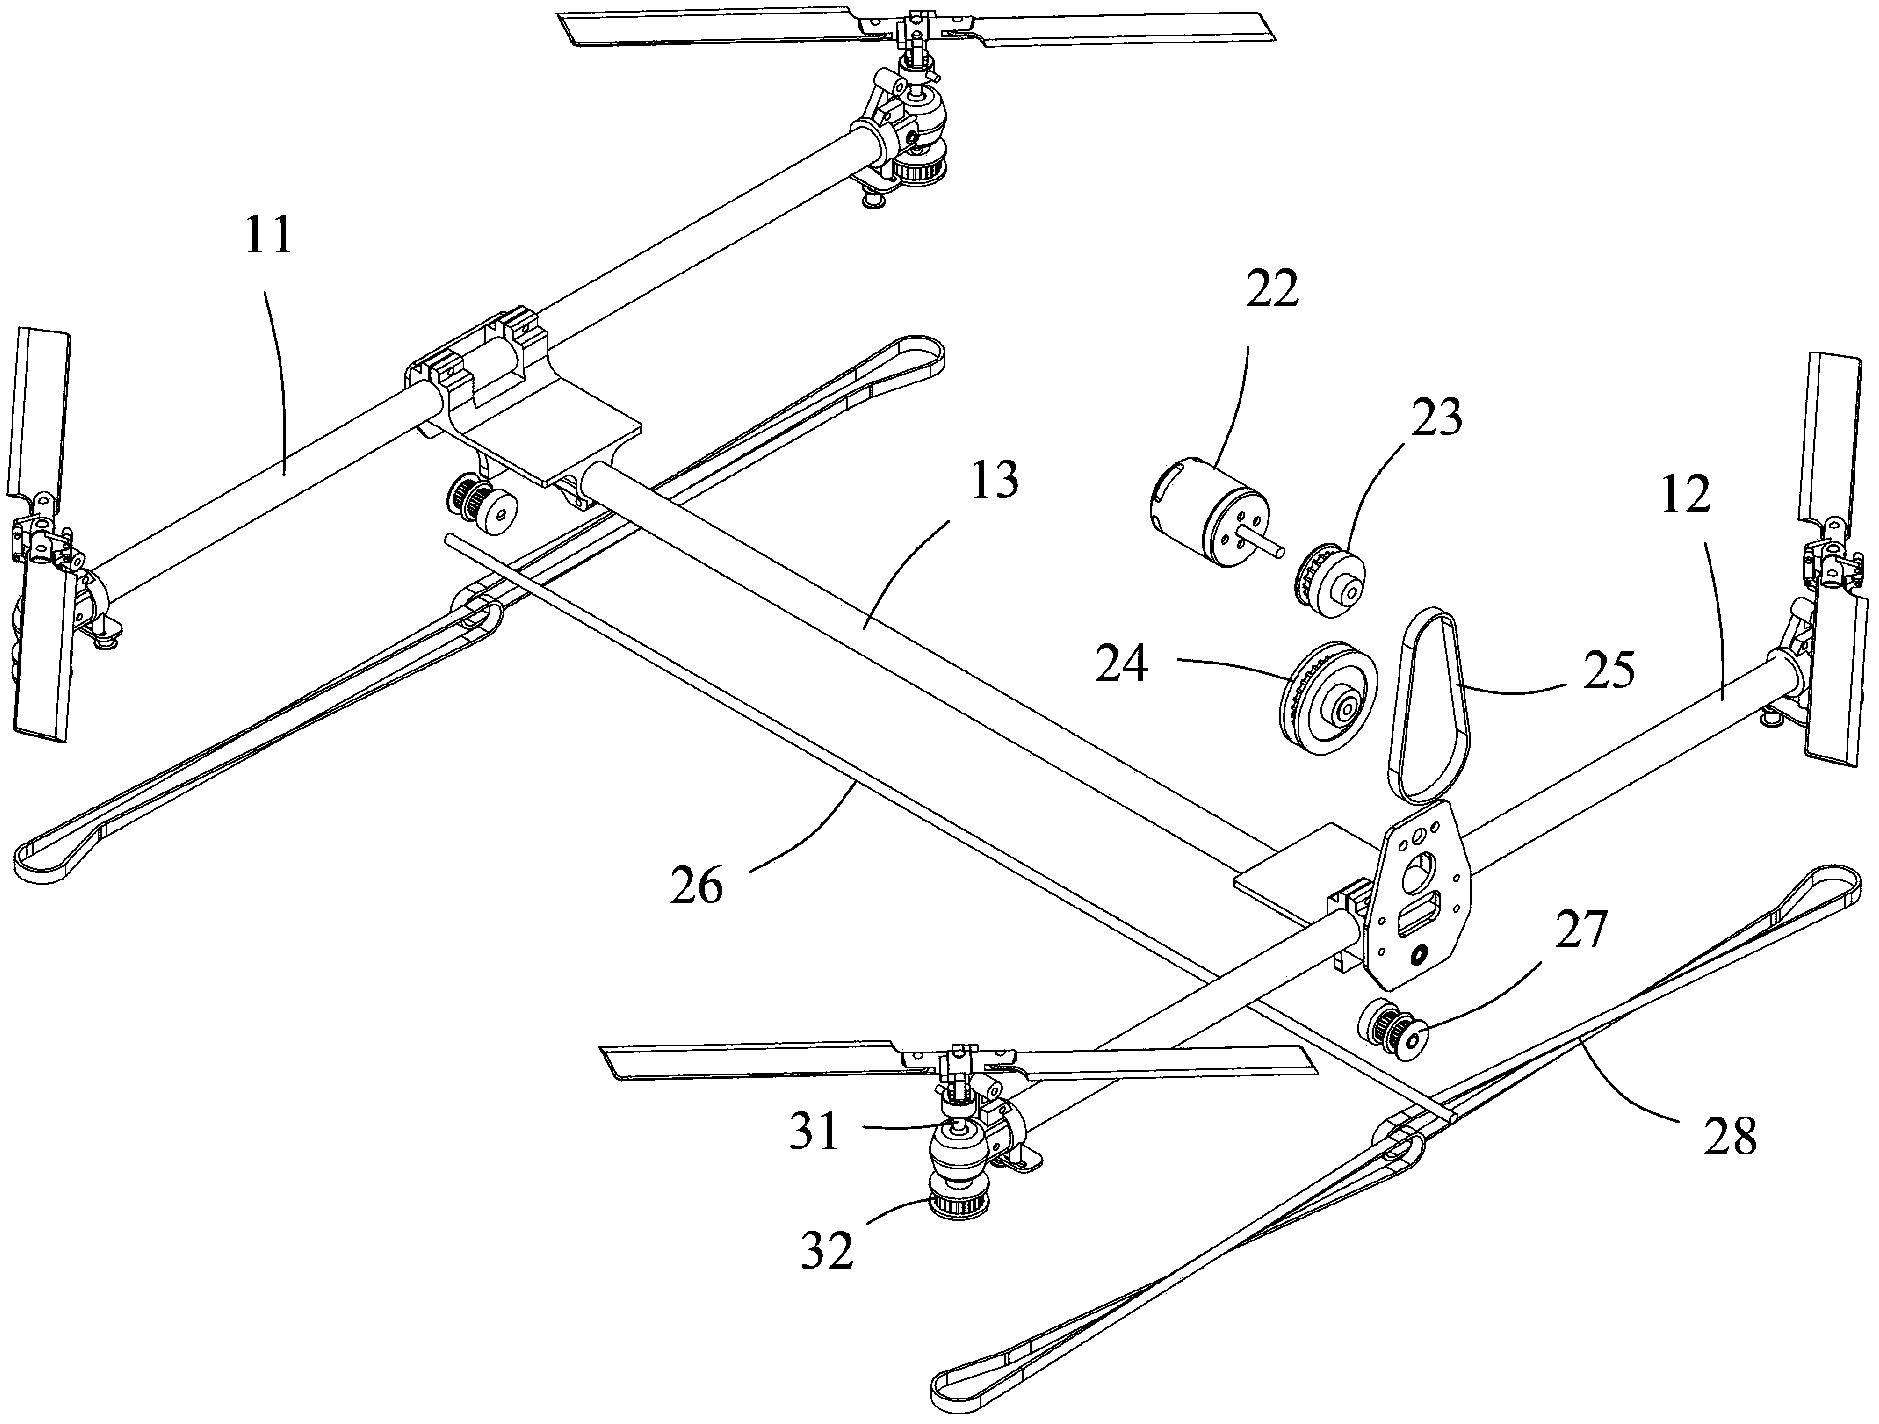 Control method and device of variable pitch aircraft